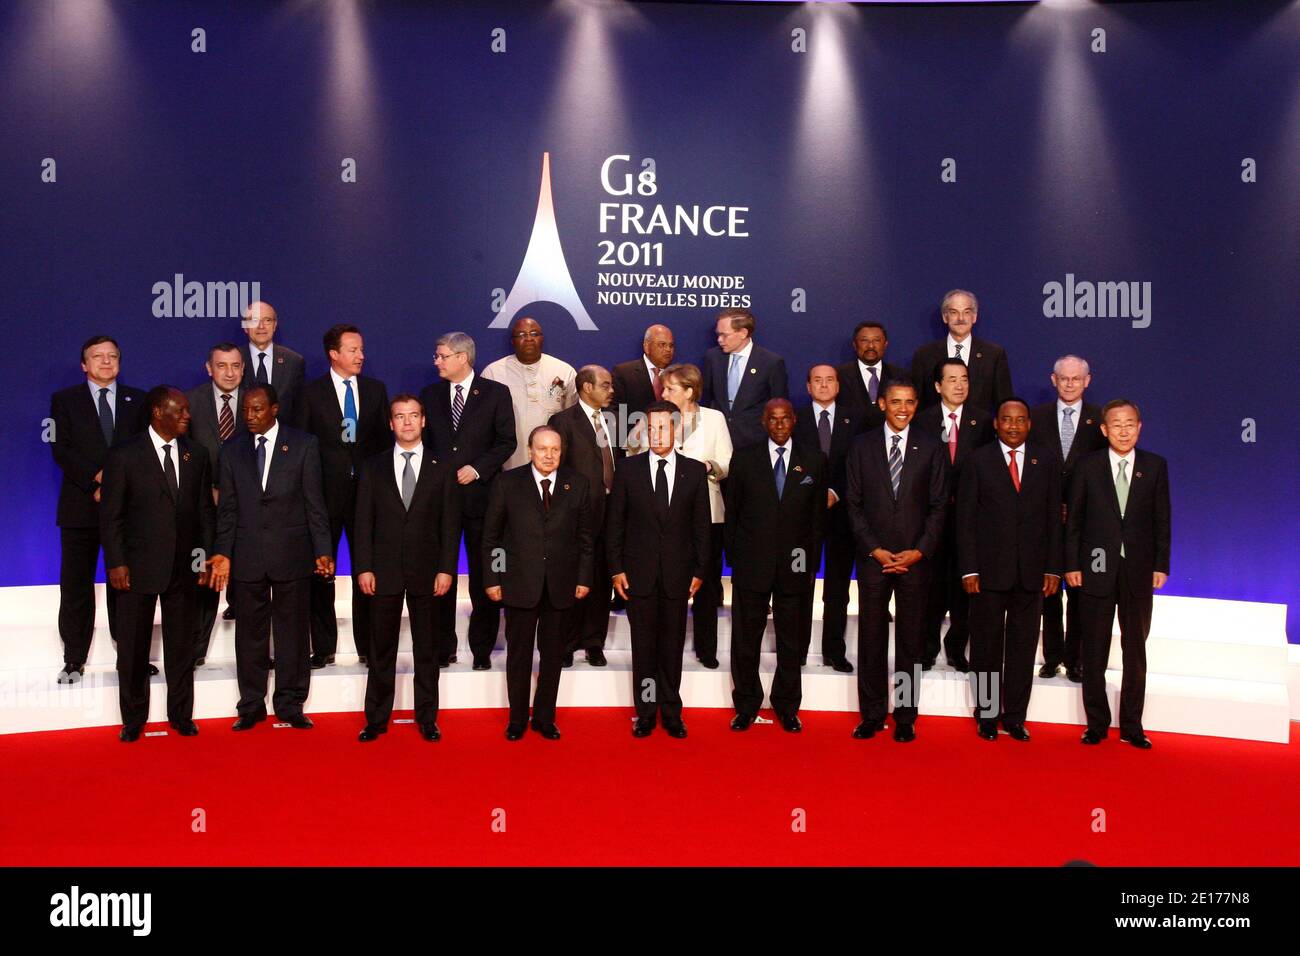 First row from L) Ivory Coast's President Alassane Ouattara, Guinean President Alpha Conde, Russian President Dmitry Medvedev, Algerian President Abdelaziz Bouteflika, French President Nicolas Sarkozy, Senegalese President Abdoulaye Wade, US President Barack Obama, Niger's President Mahamadou Issoufou and UN General Secretary Ban Ki-Moon, (second row from L) Jose Manuel Barroso, Head of the European Commission, Egyptian Prime Minister Essam Sharaf, British Prime Minister David Cameron and Canadian Prime Minister Stephen Harper, Ethiopia's Prime Minister Meles Zenawi, German Chancellor Angela M Stock Photo